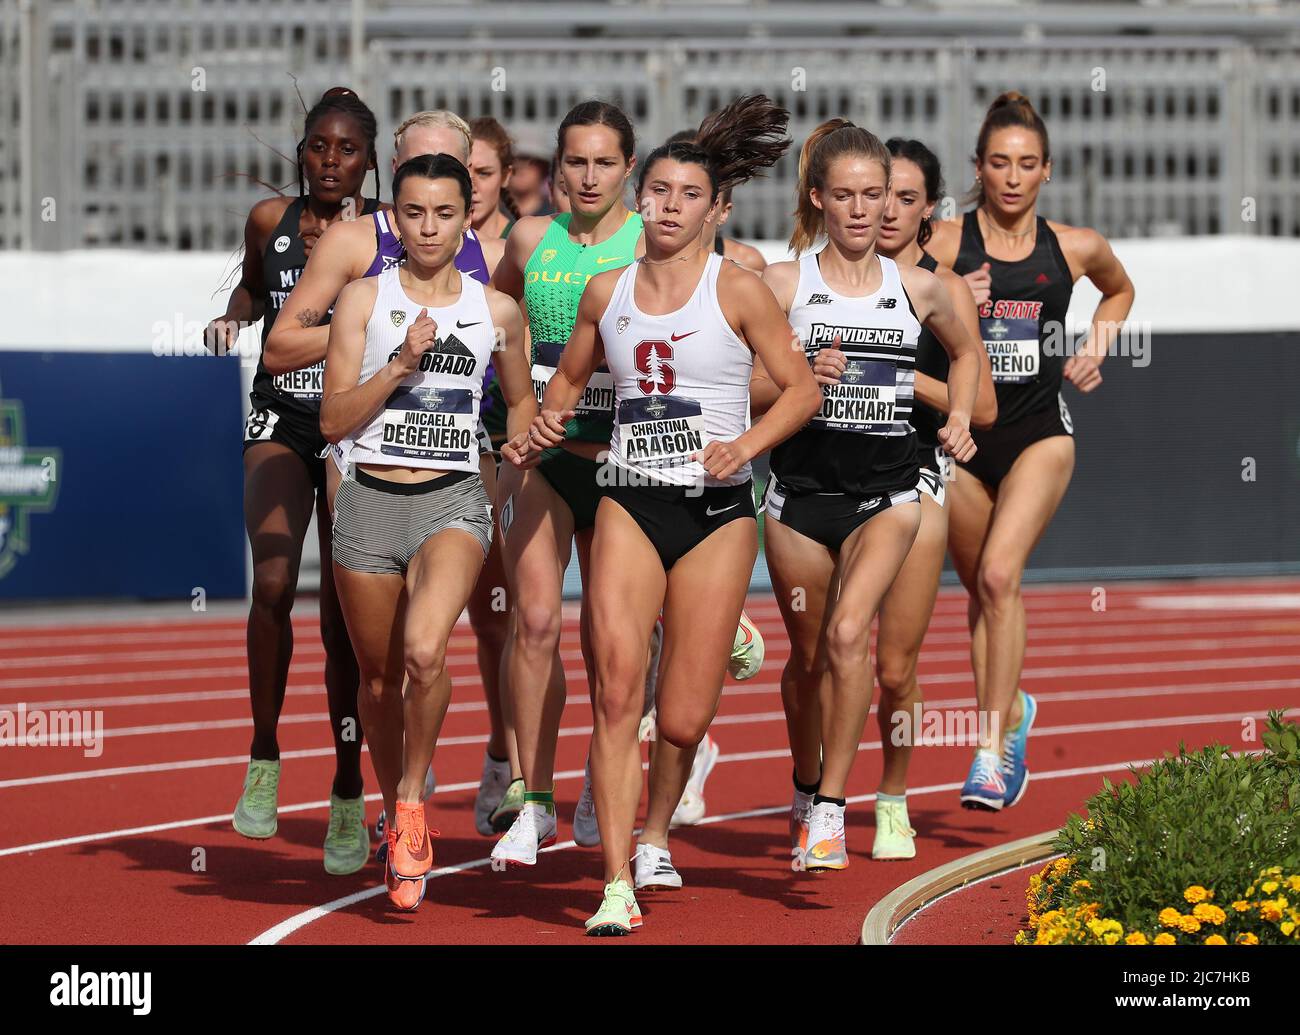 Hayward Field, Eugene, OR, USA. 9th June, 2022. Christina Aragon of Stanford and Micaela Degenero of Colorado lead the pack in the Women's 1500 Meter semi-finals during the 2022 NCAA Track & Field Championships at Hayward Field, Eugene, OR. Larry C. Lawson/CSM (Cal Sport Media via AP Images). Credit: csm/Alamy Live News Stock Photo